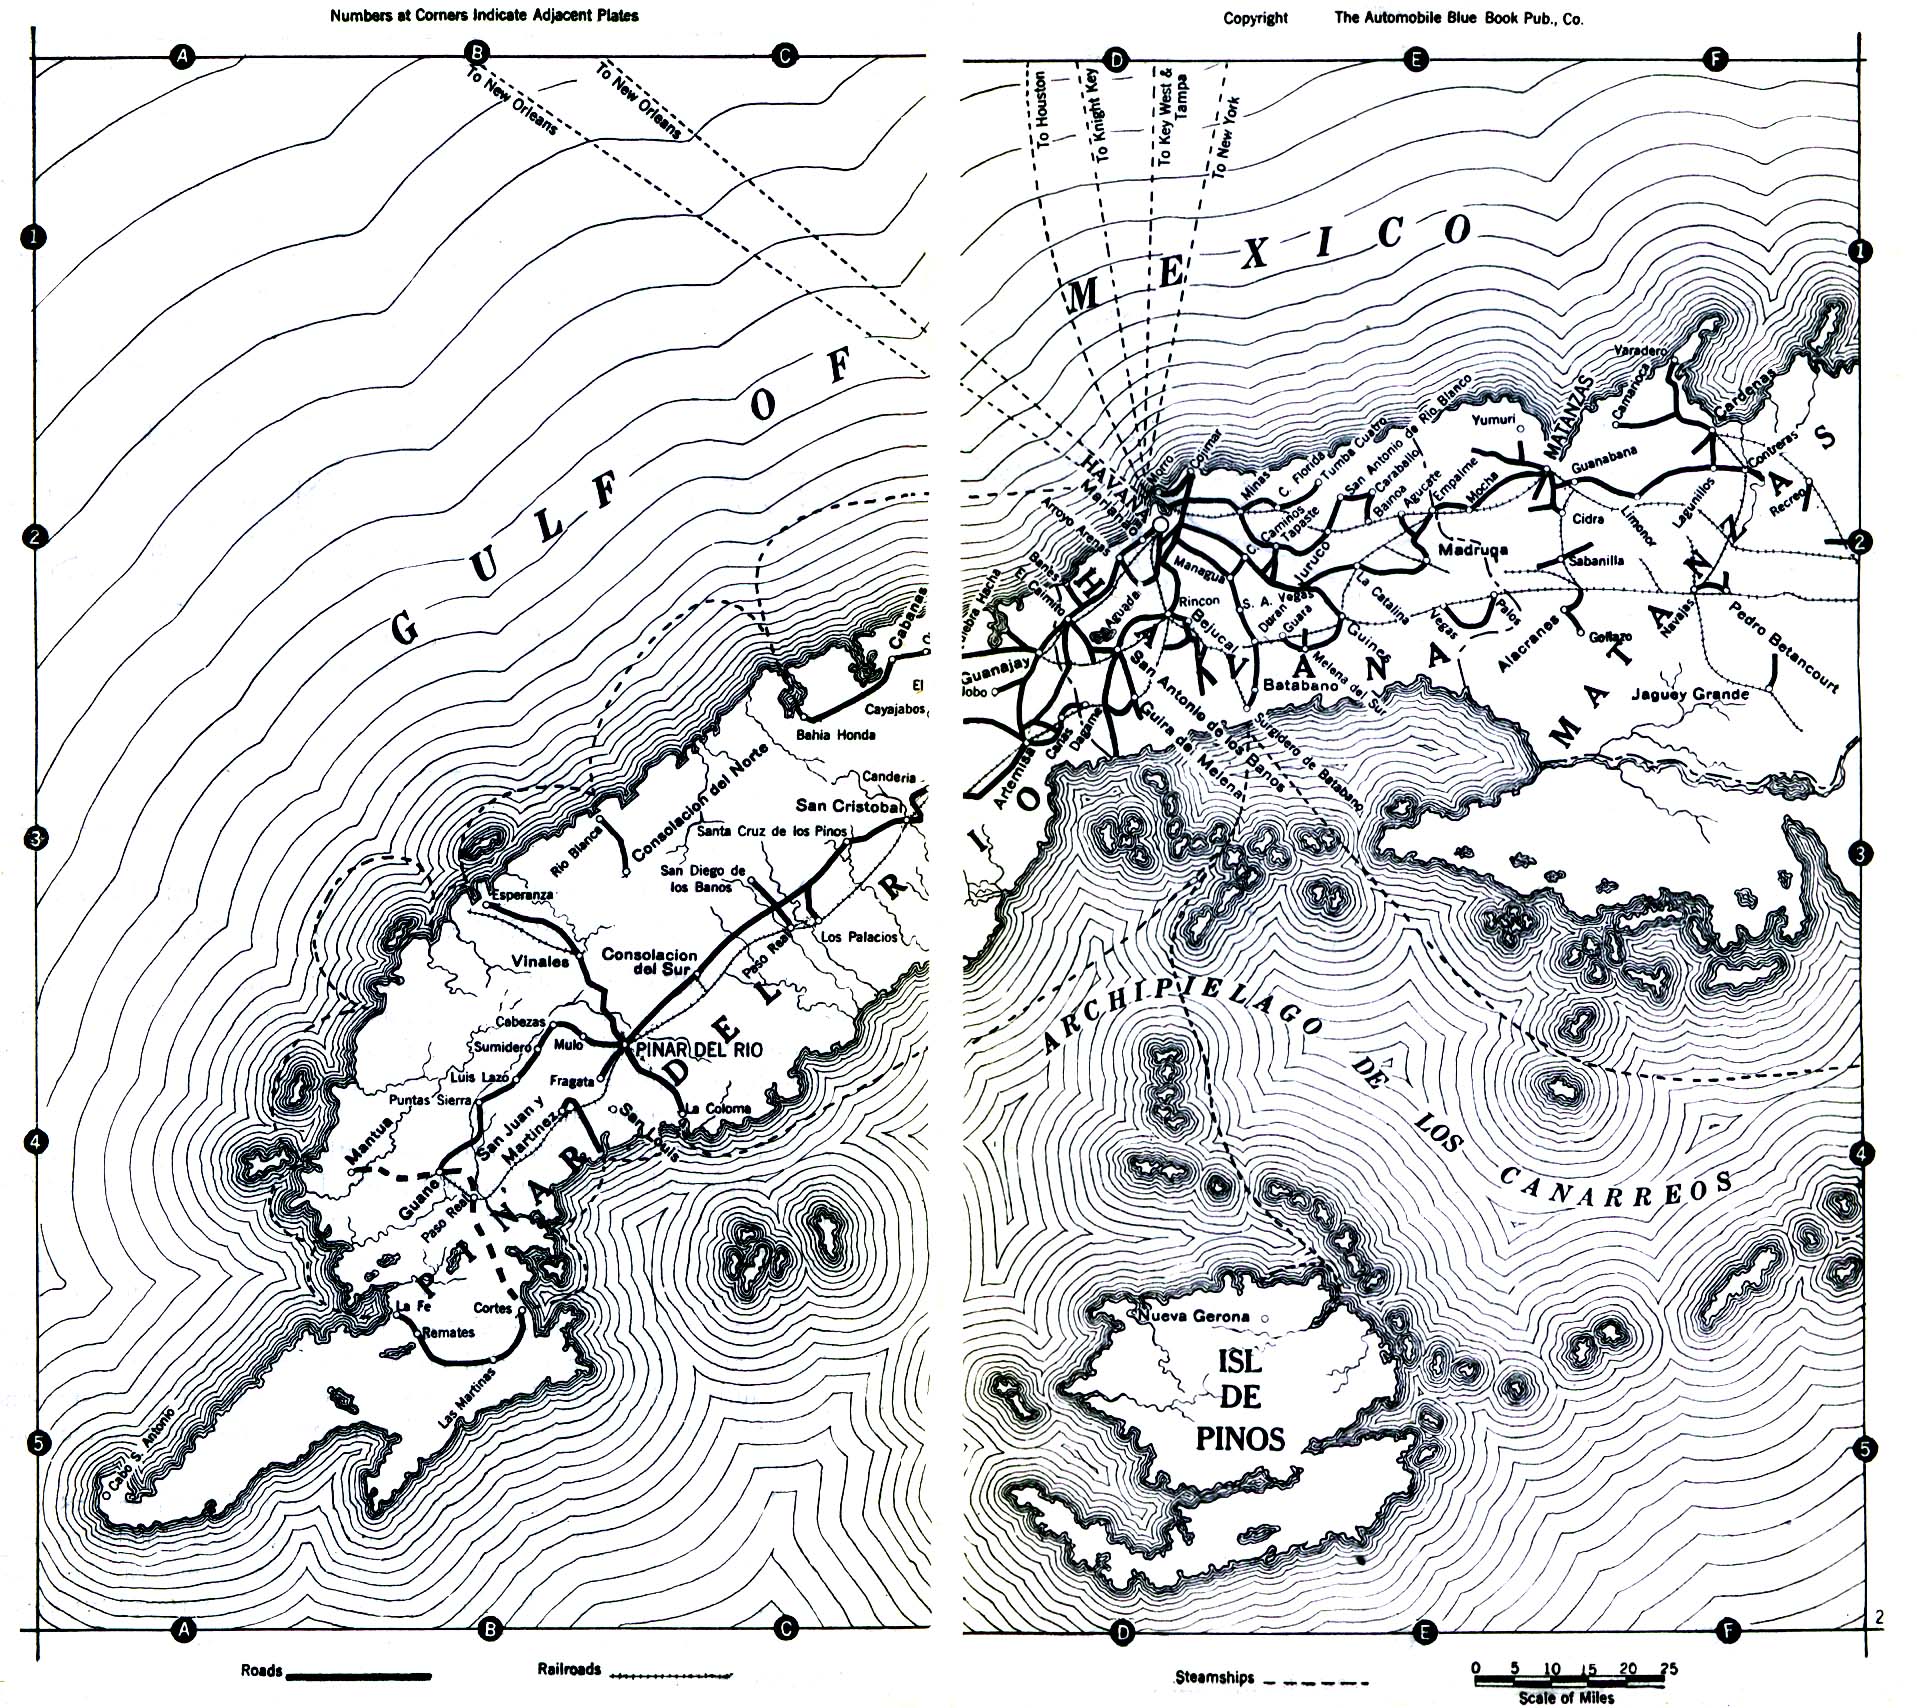 Historical Maps of the Americas Cuba 1919 (323K)
From The Automobile Blue Book, Volume Six, 1919. 